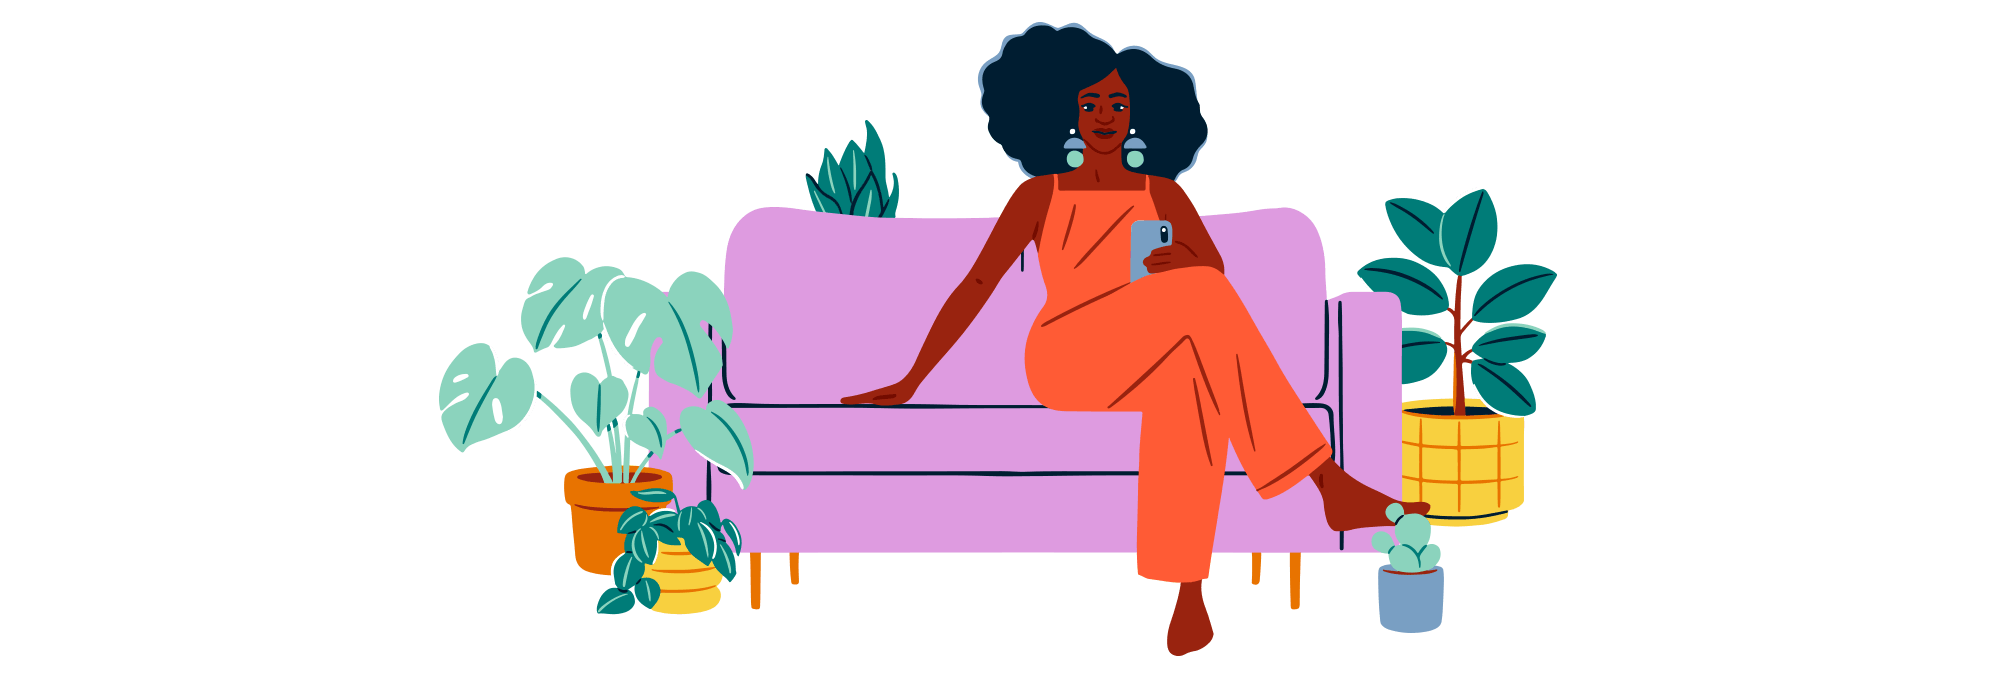 Illustration of a woman sitting on a couch checking her phone.